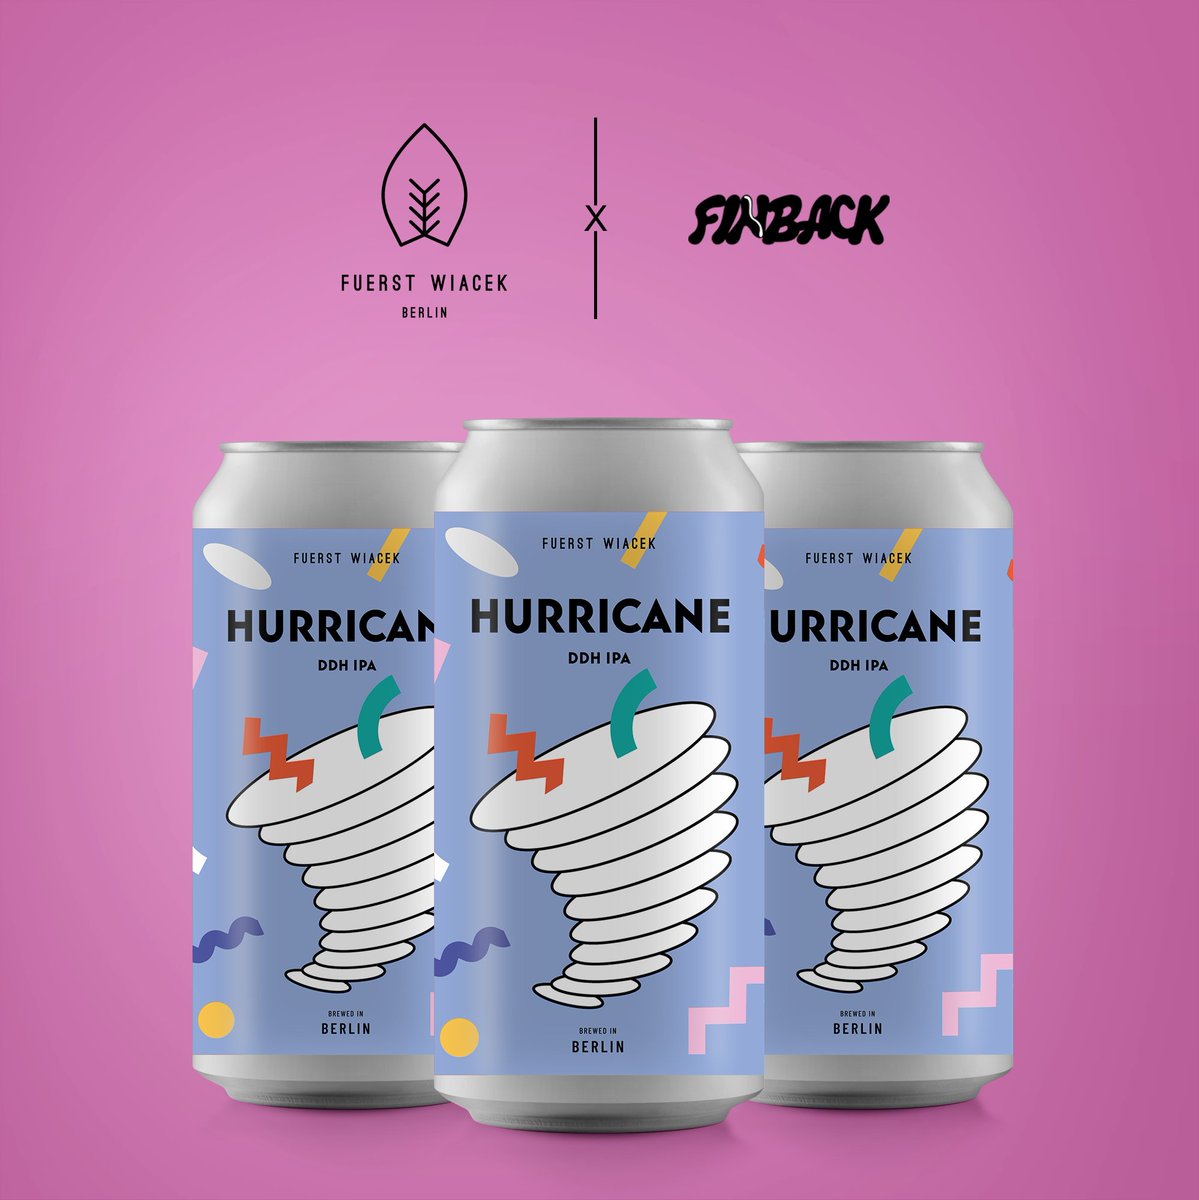 🚀 NEW RELEASE 🚀 Our new @finbackbrewery collaboration, Hurricane is available on the webshop. fuerstwiacek.com/buy/fresh-craf… Cans and kegs will start making their way out into the world in the coming days.